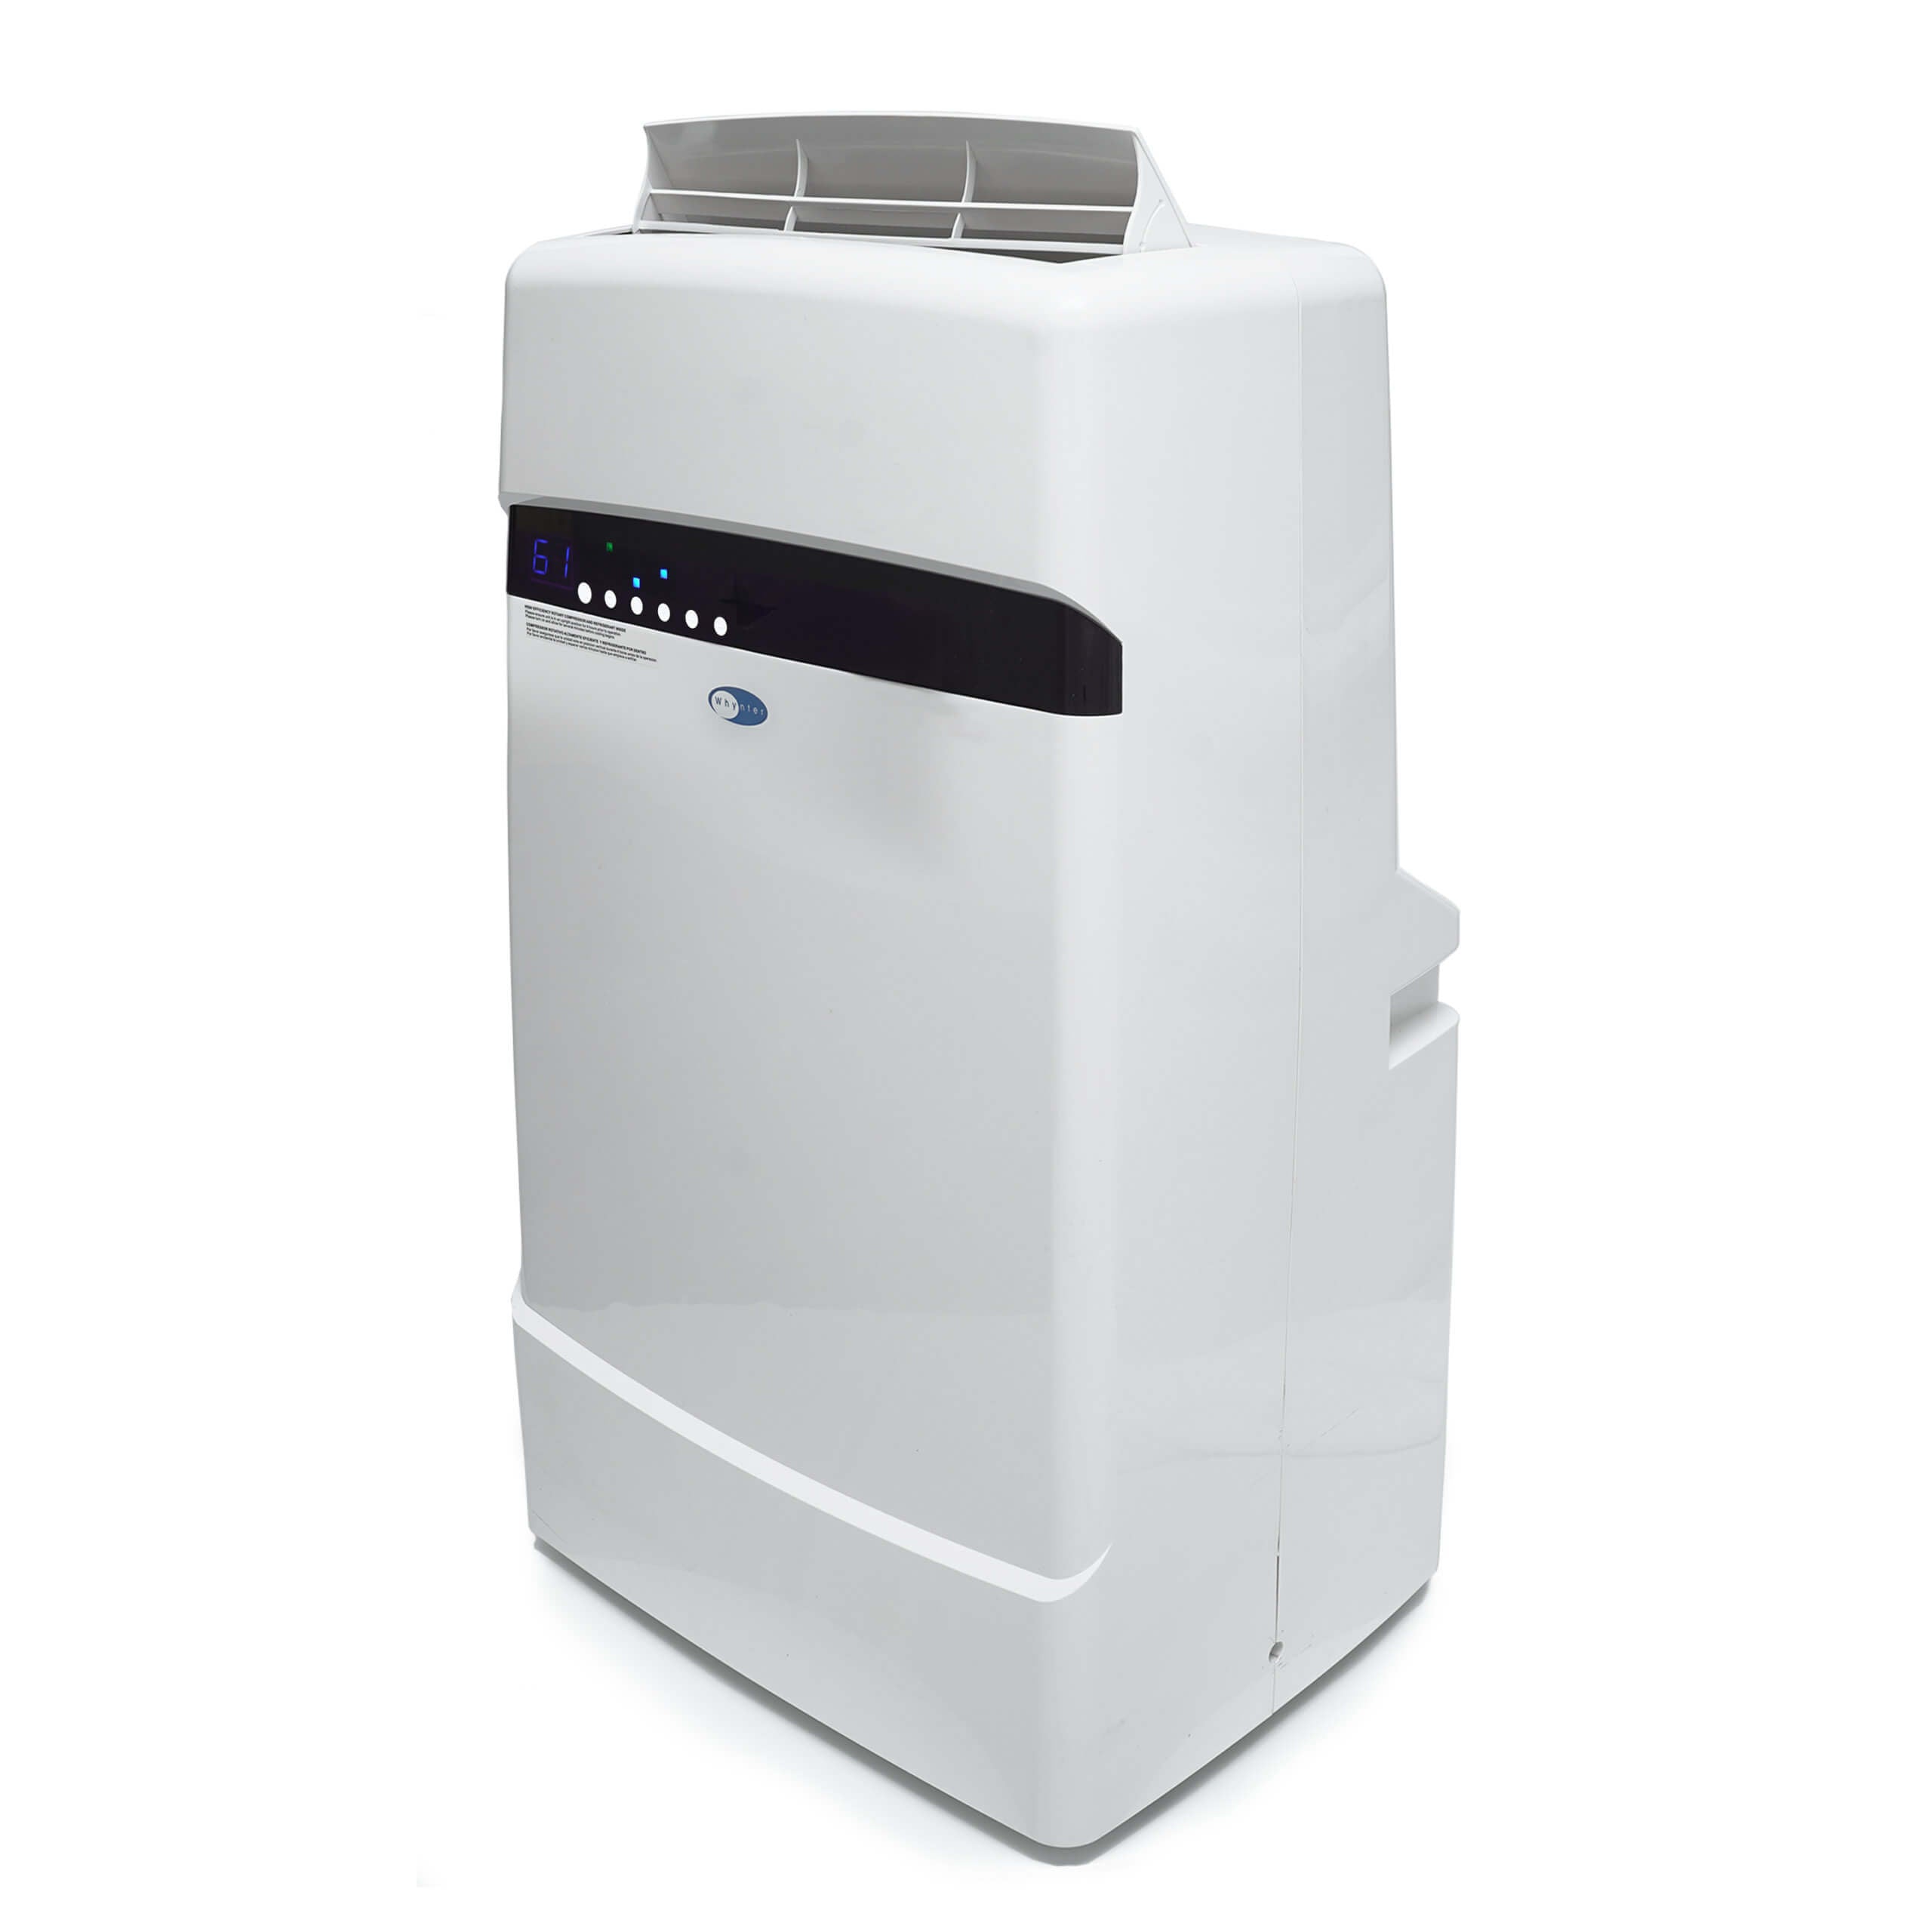 Whynter, Whynter ARC-12SD 12,000 BTU Portable Air Conditioner with Dehumidifier New